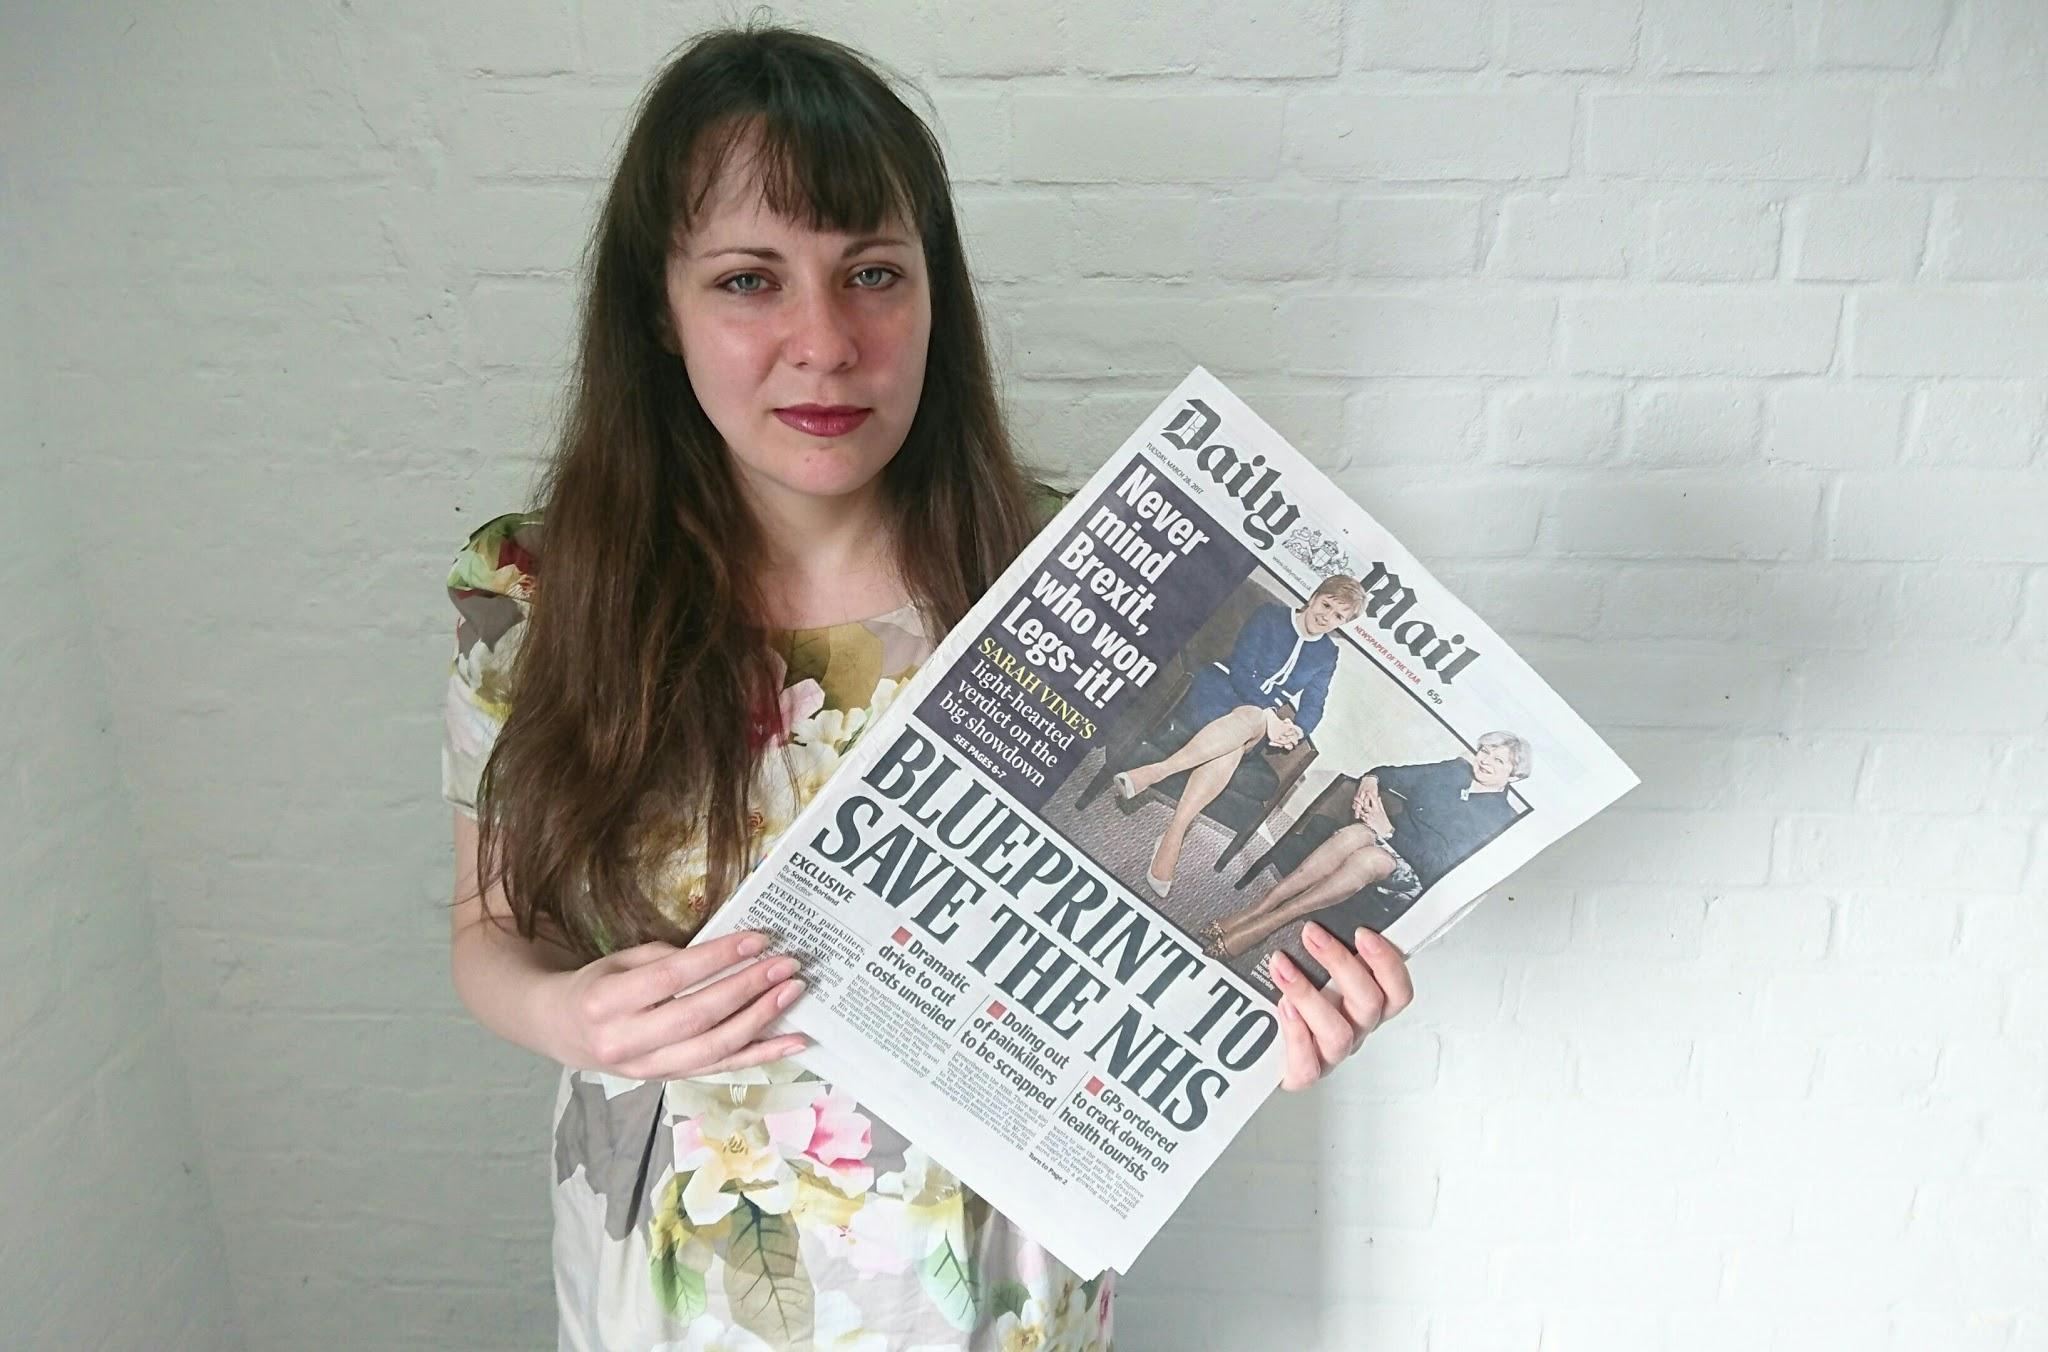 Amelia Womack is the deputy leader of the Green Party